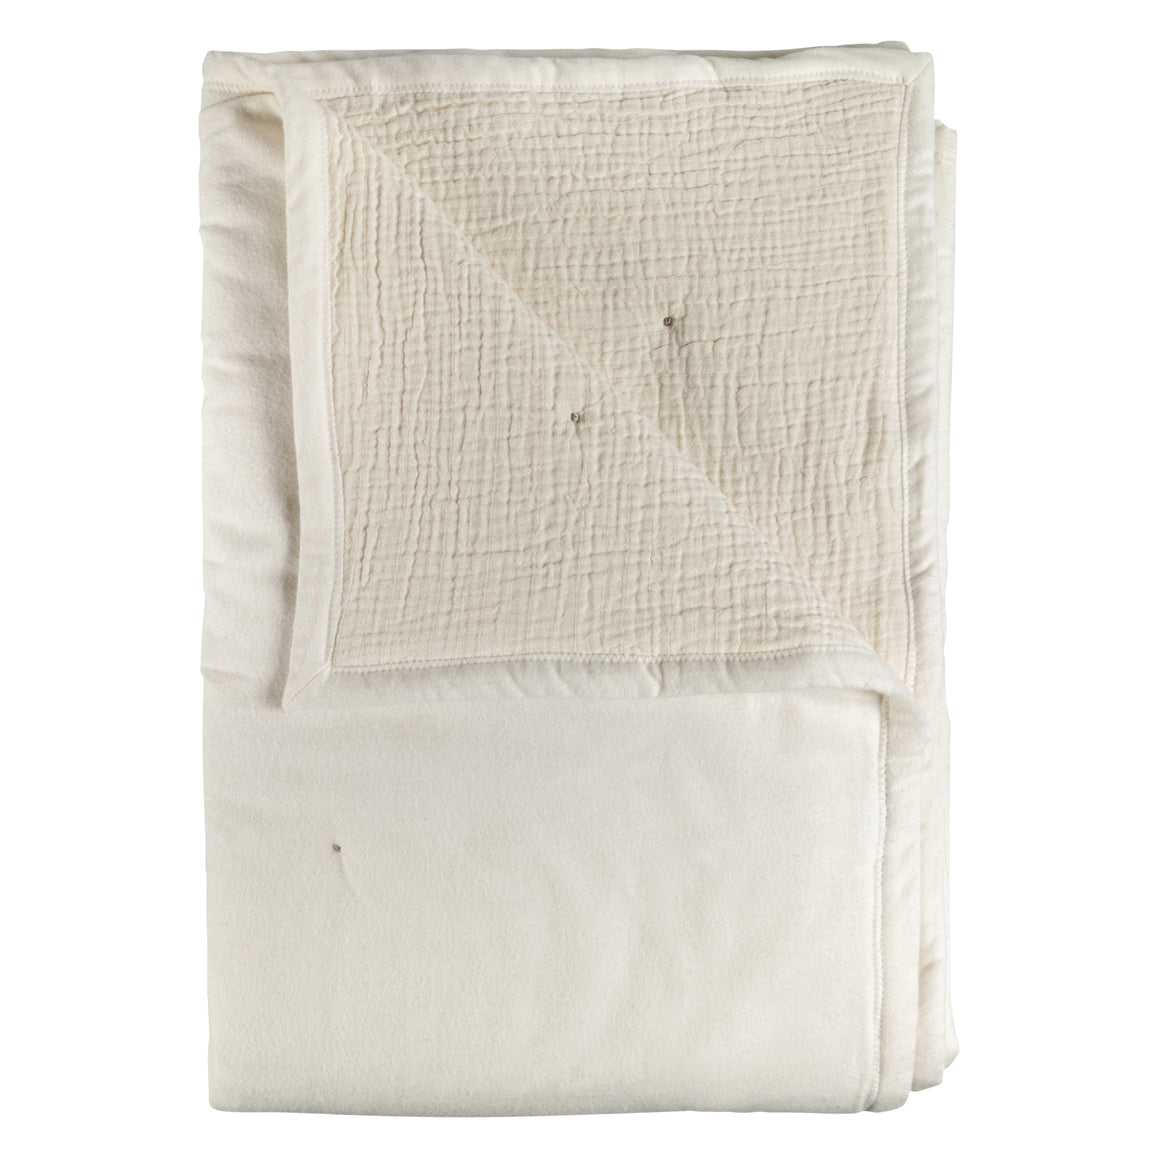 Soft baby blanket by Annur in cream colour  at The Archive Store